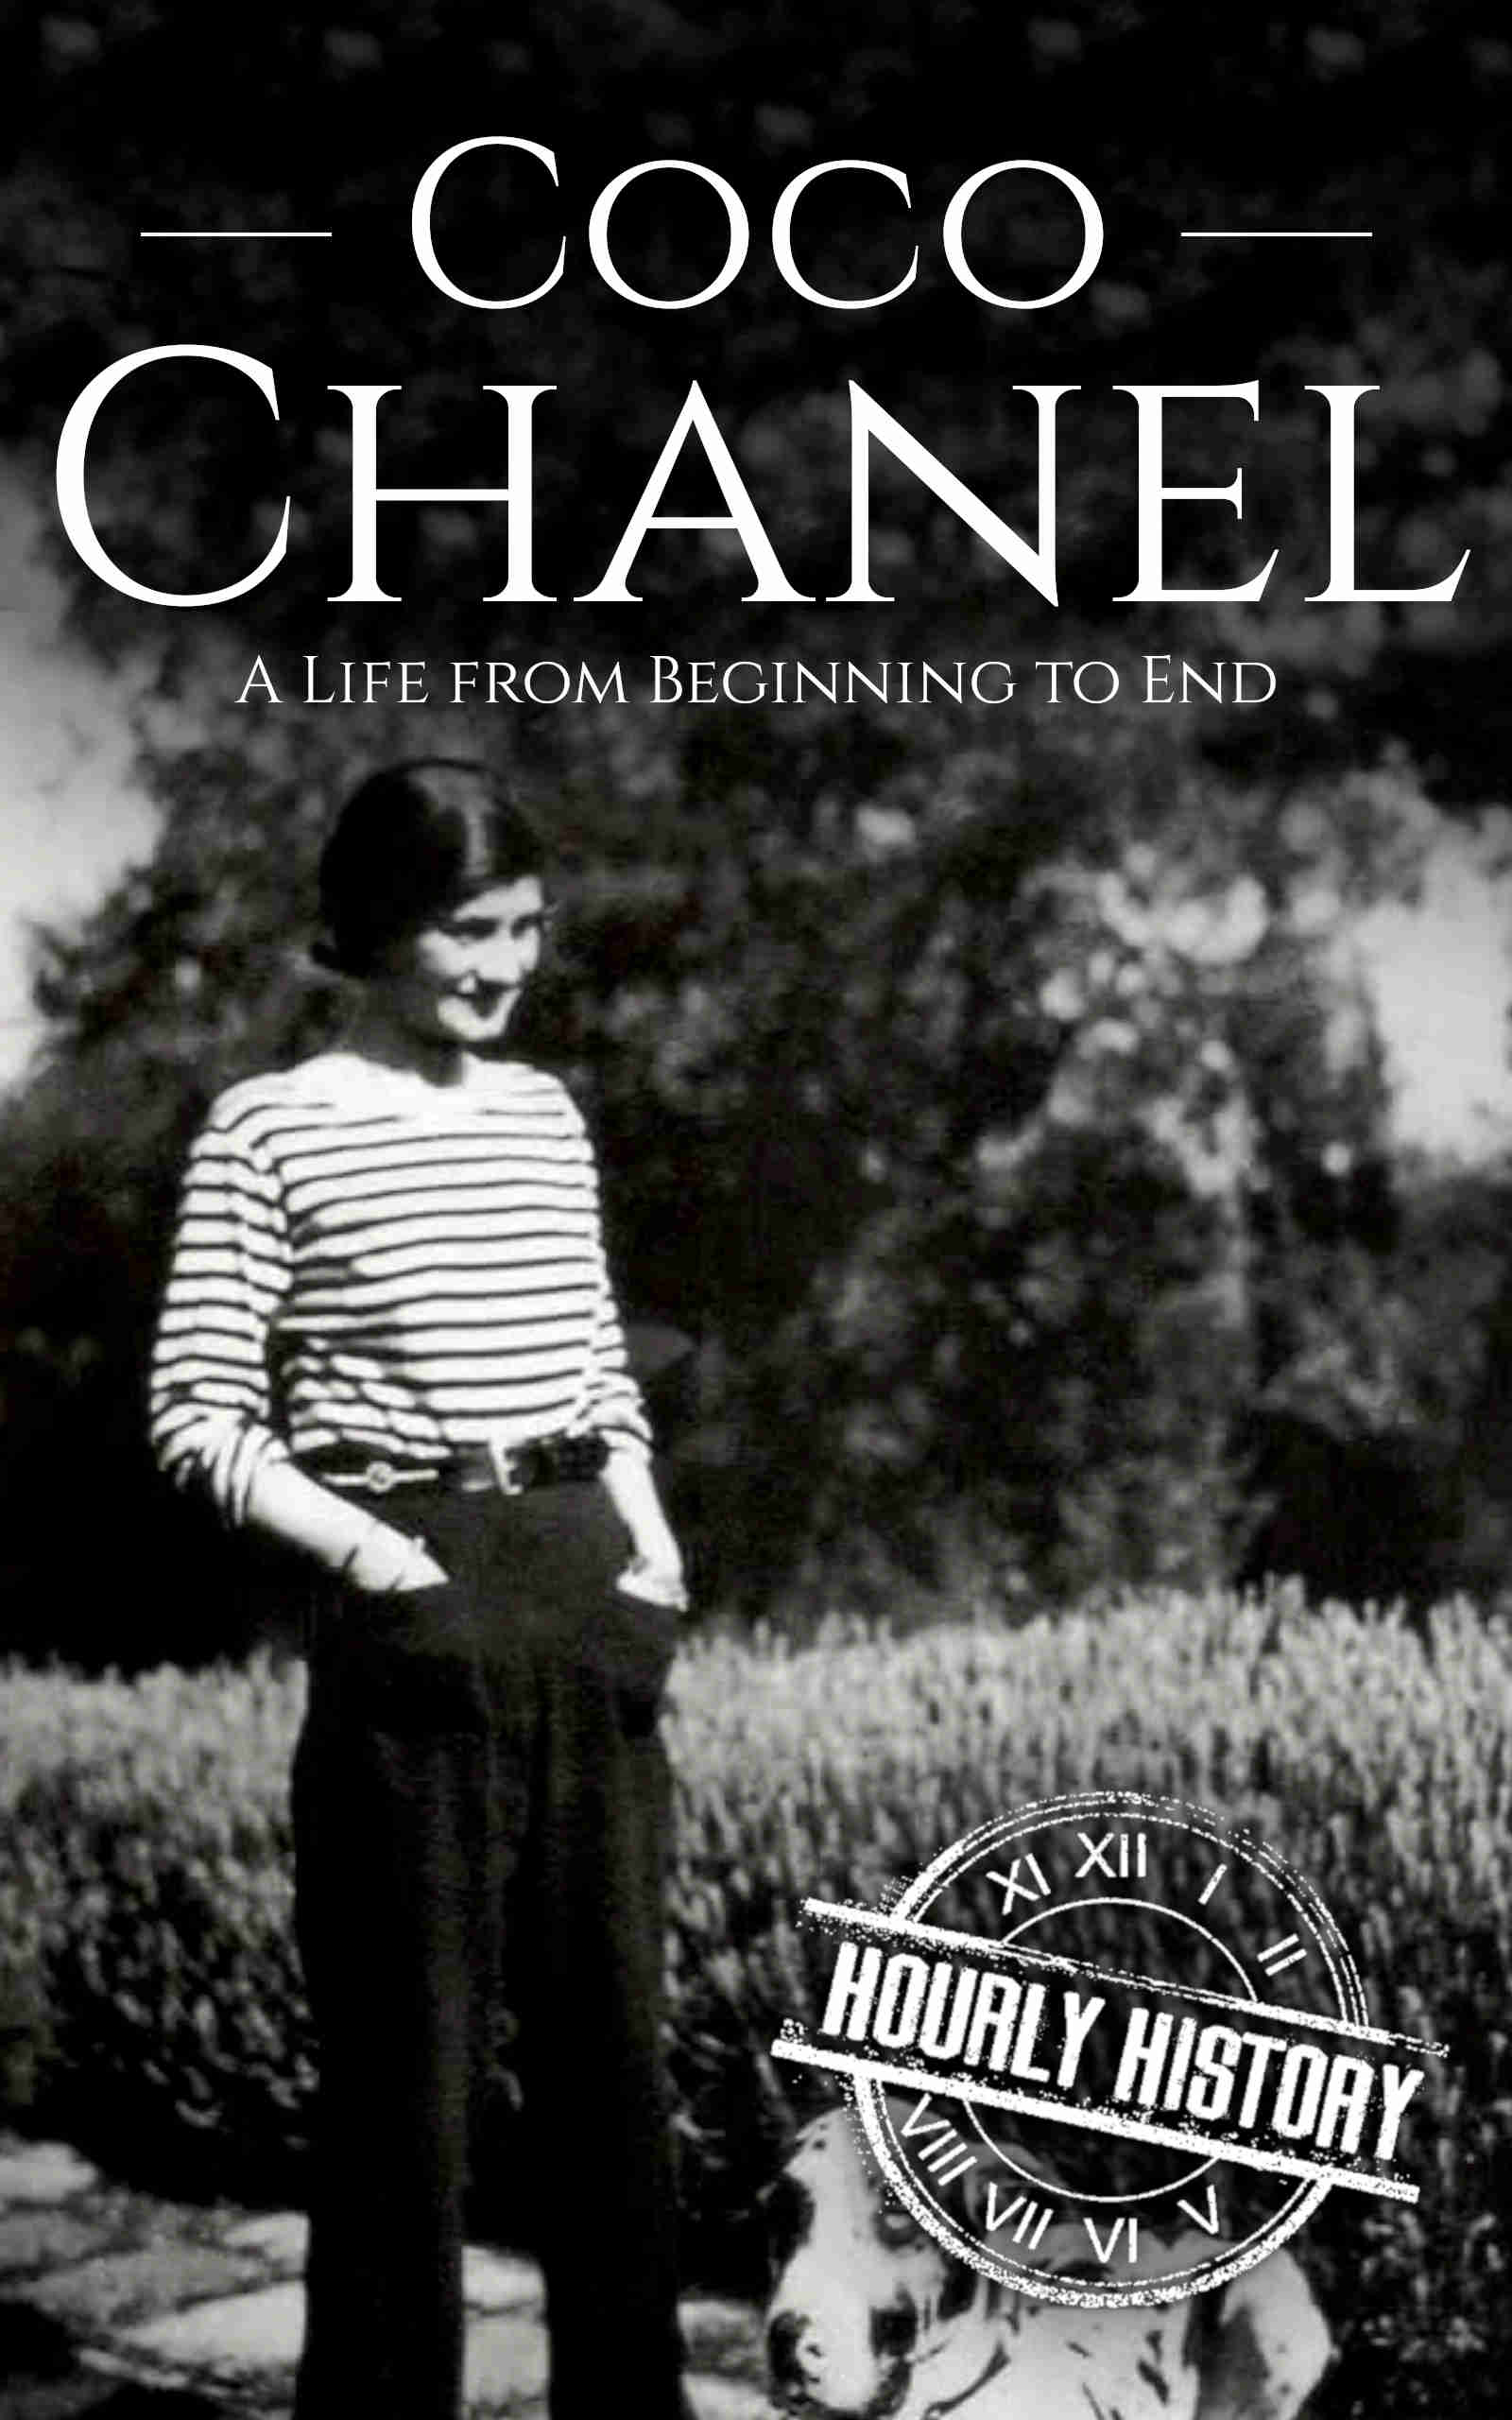 coco chanel biography book